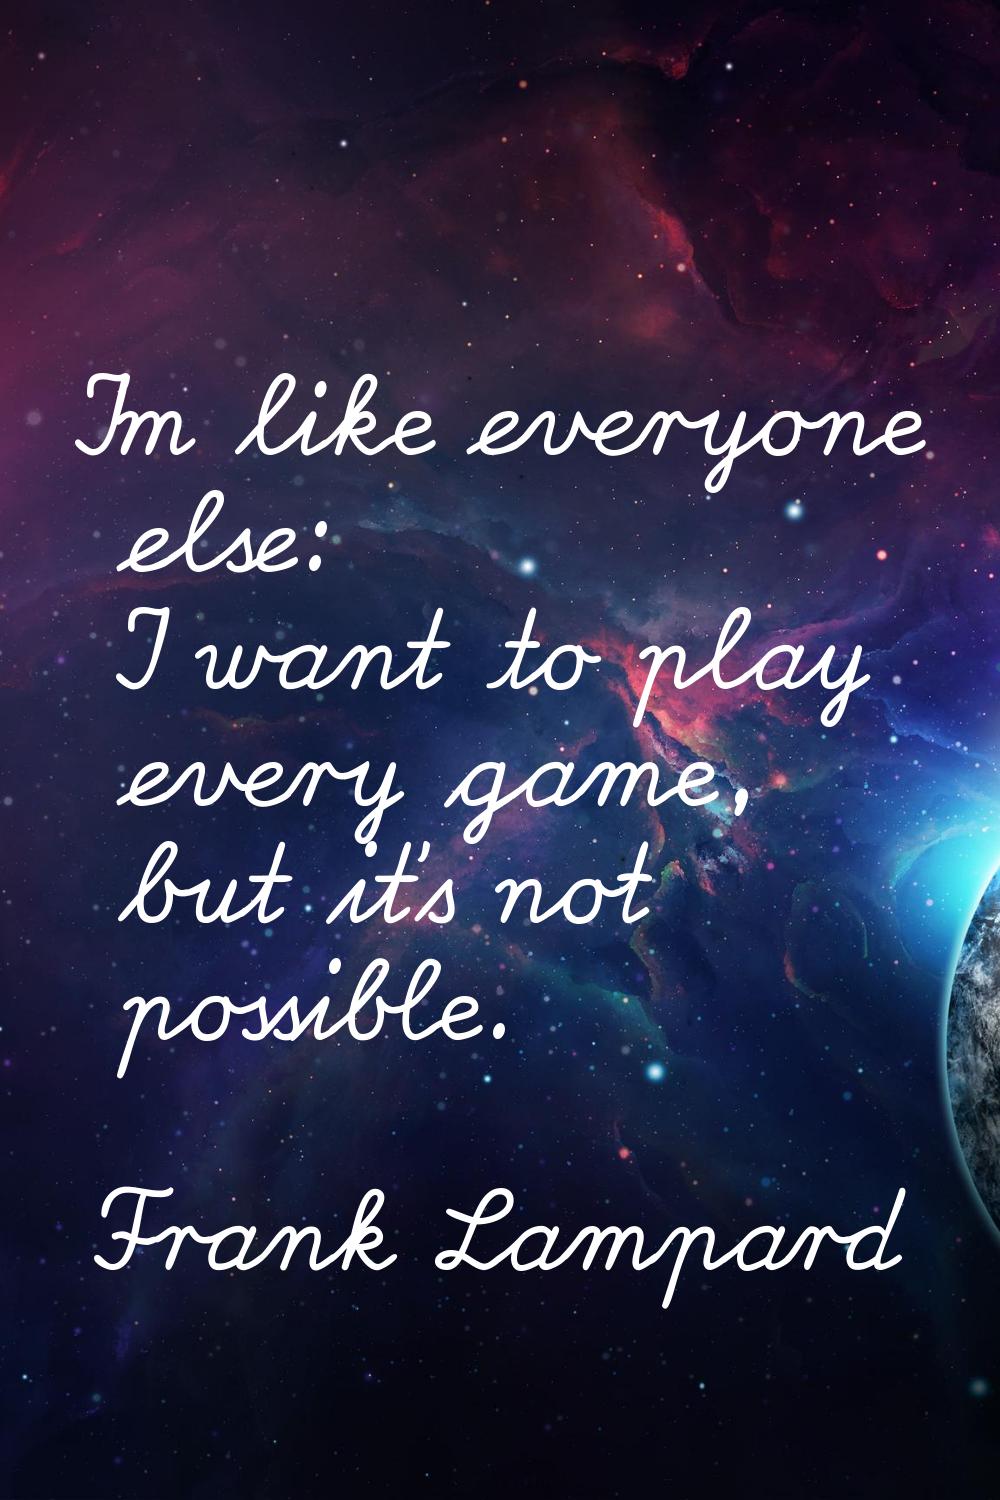 I'm like everyone else: I want to play every game, but it's not possible.